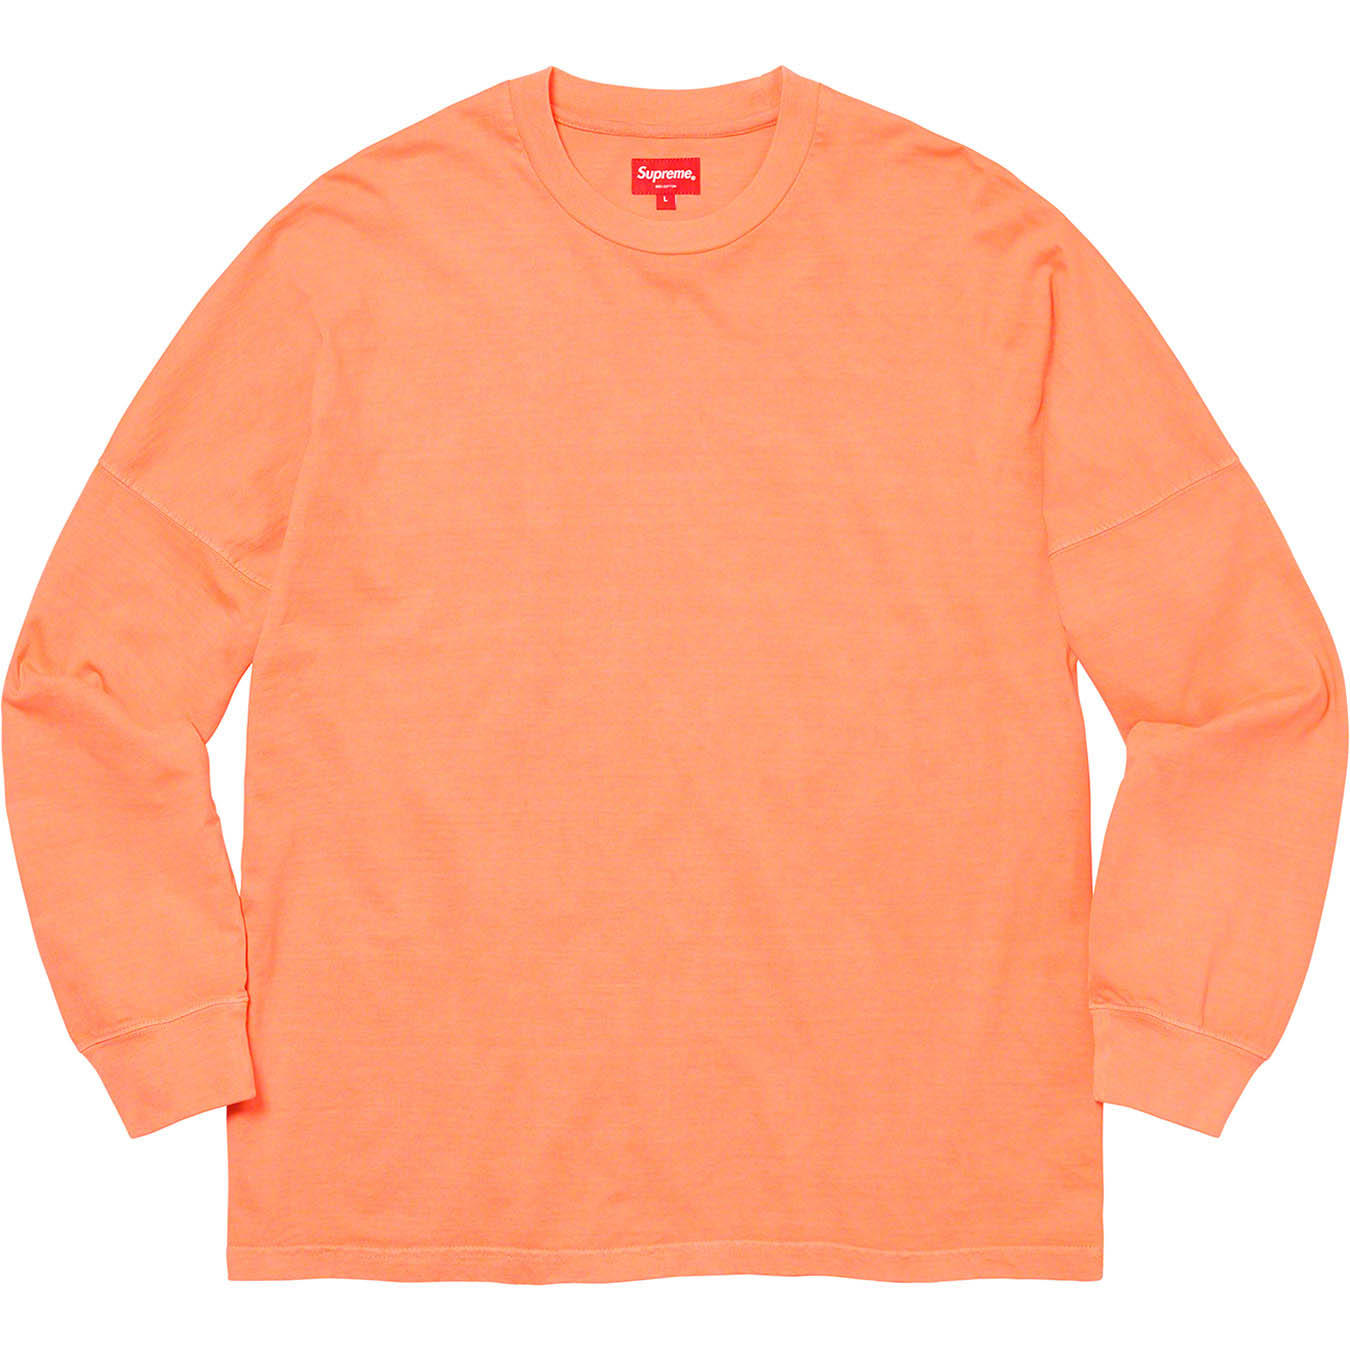 Supreme Overdyed L/S Top